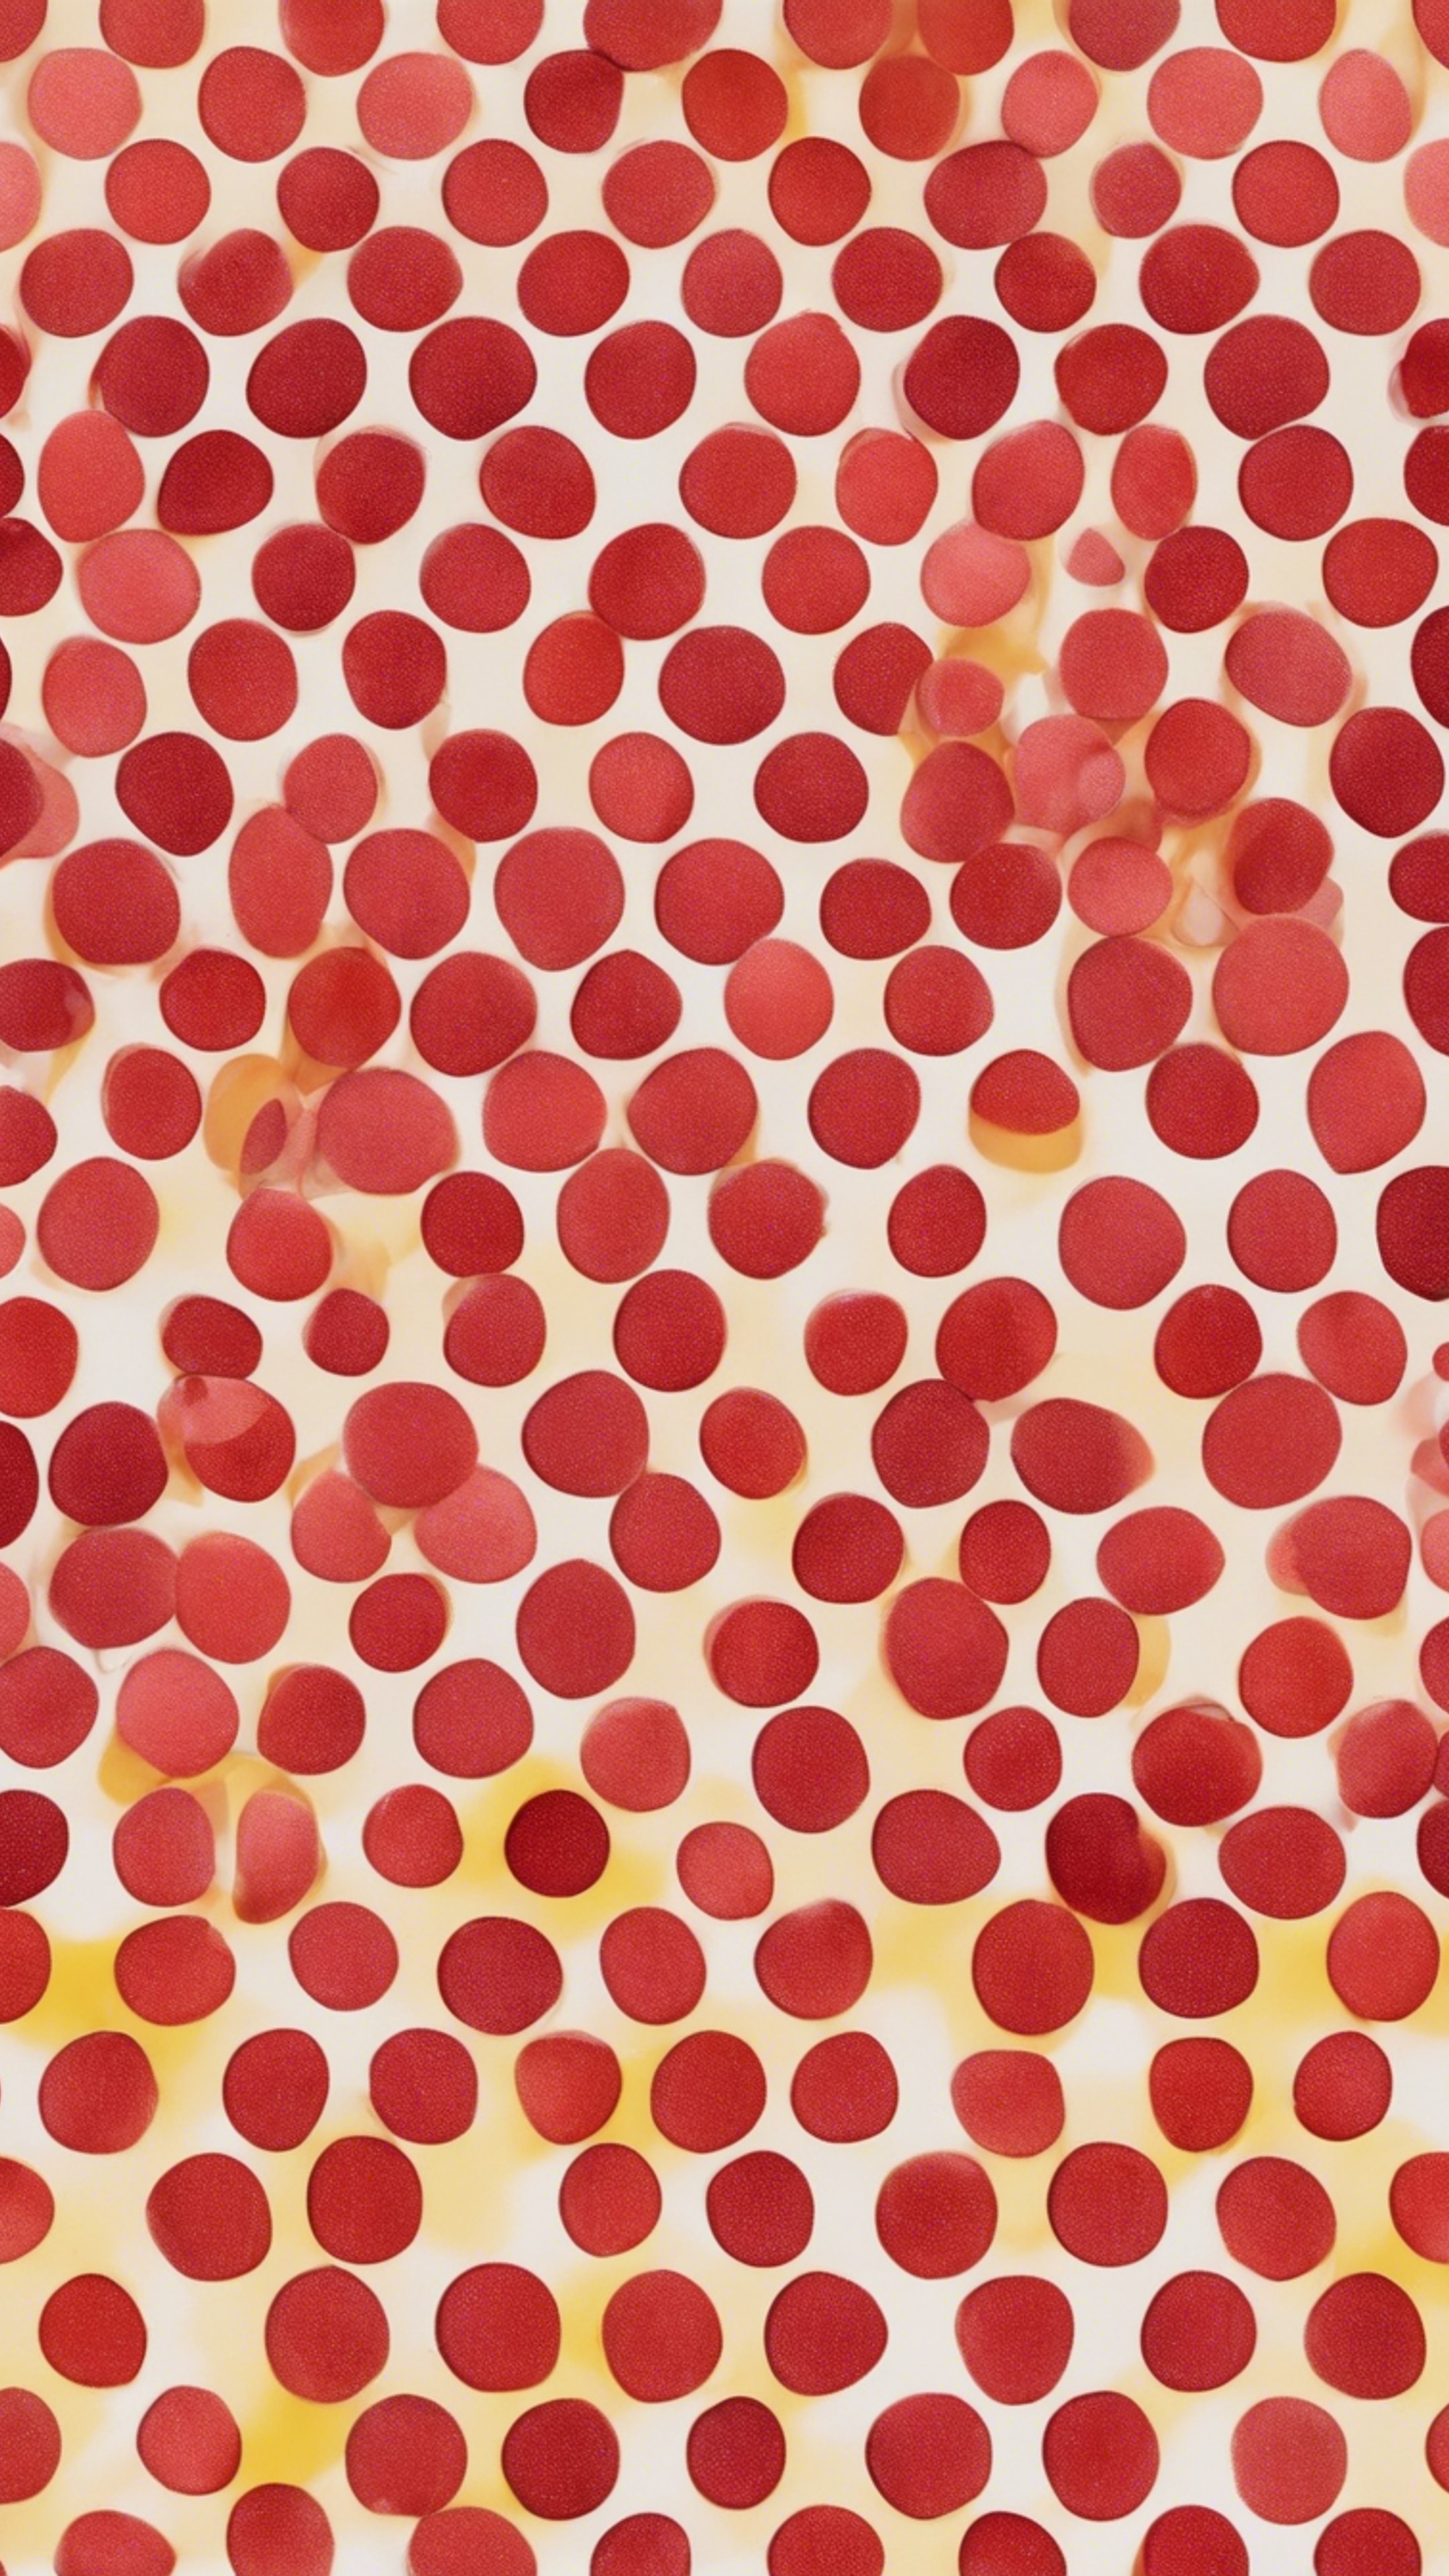 Red polka dots clashing beautifully with yellow ones, all over the seamless canvas. Behang[6845ea3f5aaf42daa07d]